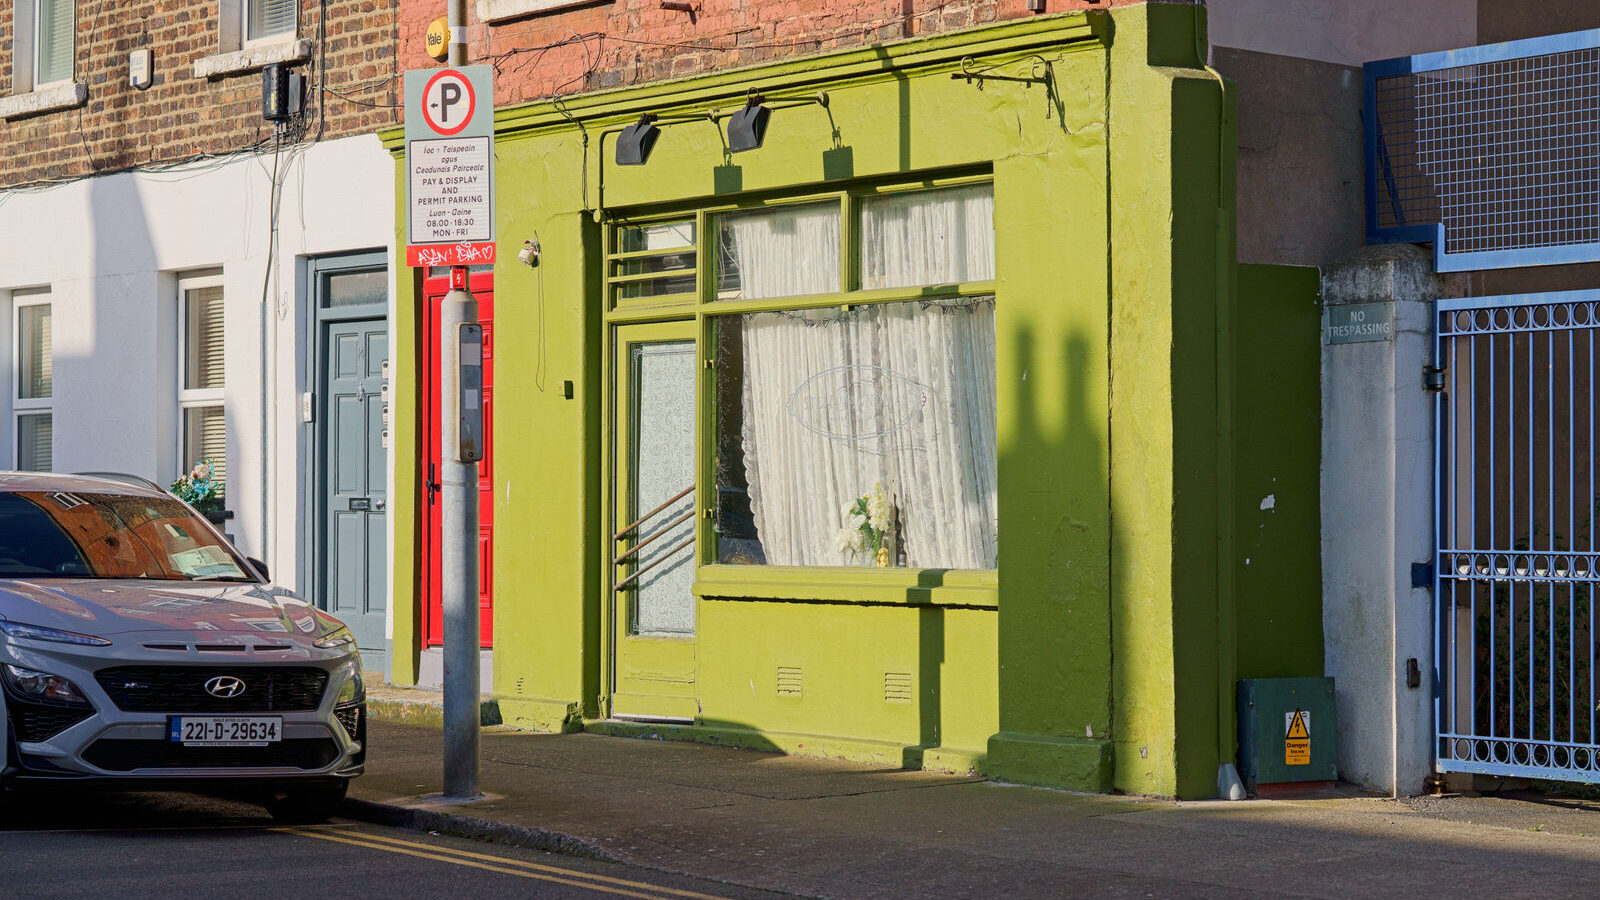 EXPLORING AUGHRIM STREET IN THE STONEYBATTER AREA OF DUBLIN [AND AUGHRIM LANE]-228643-1